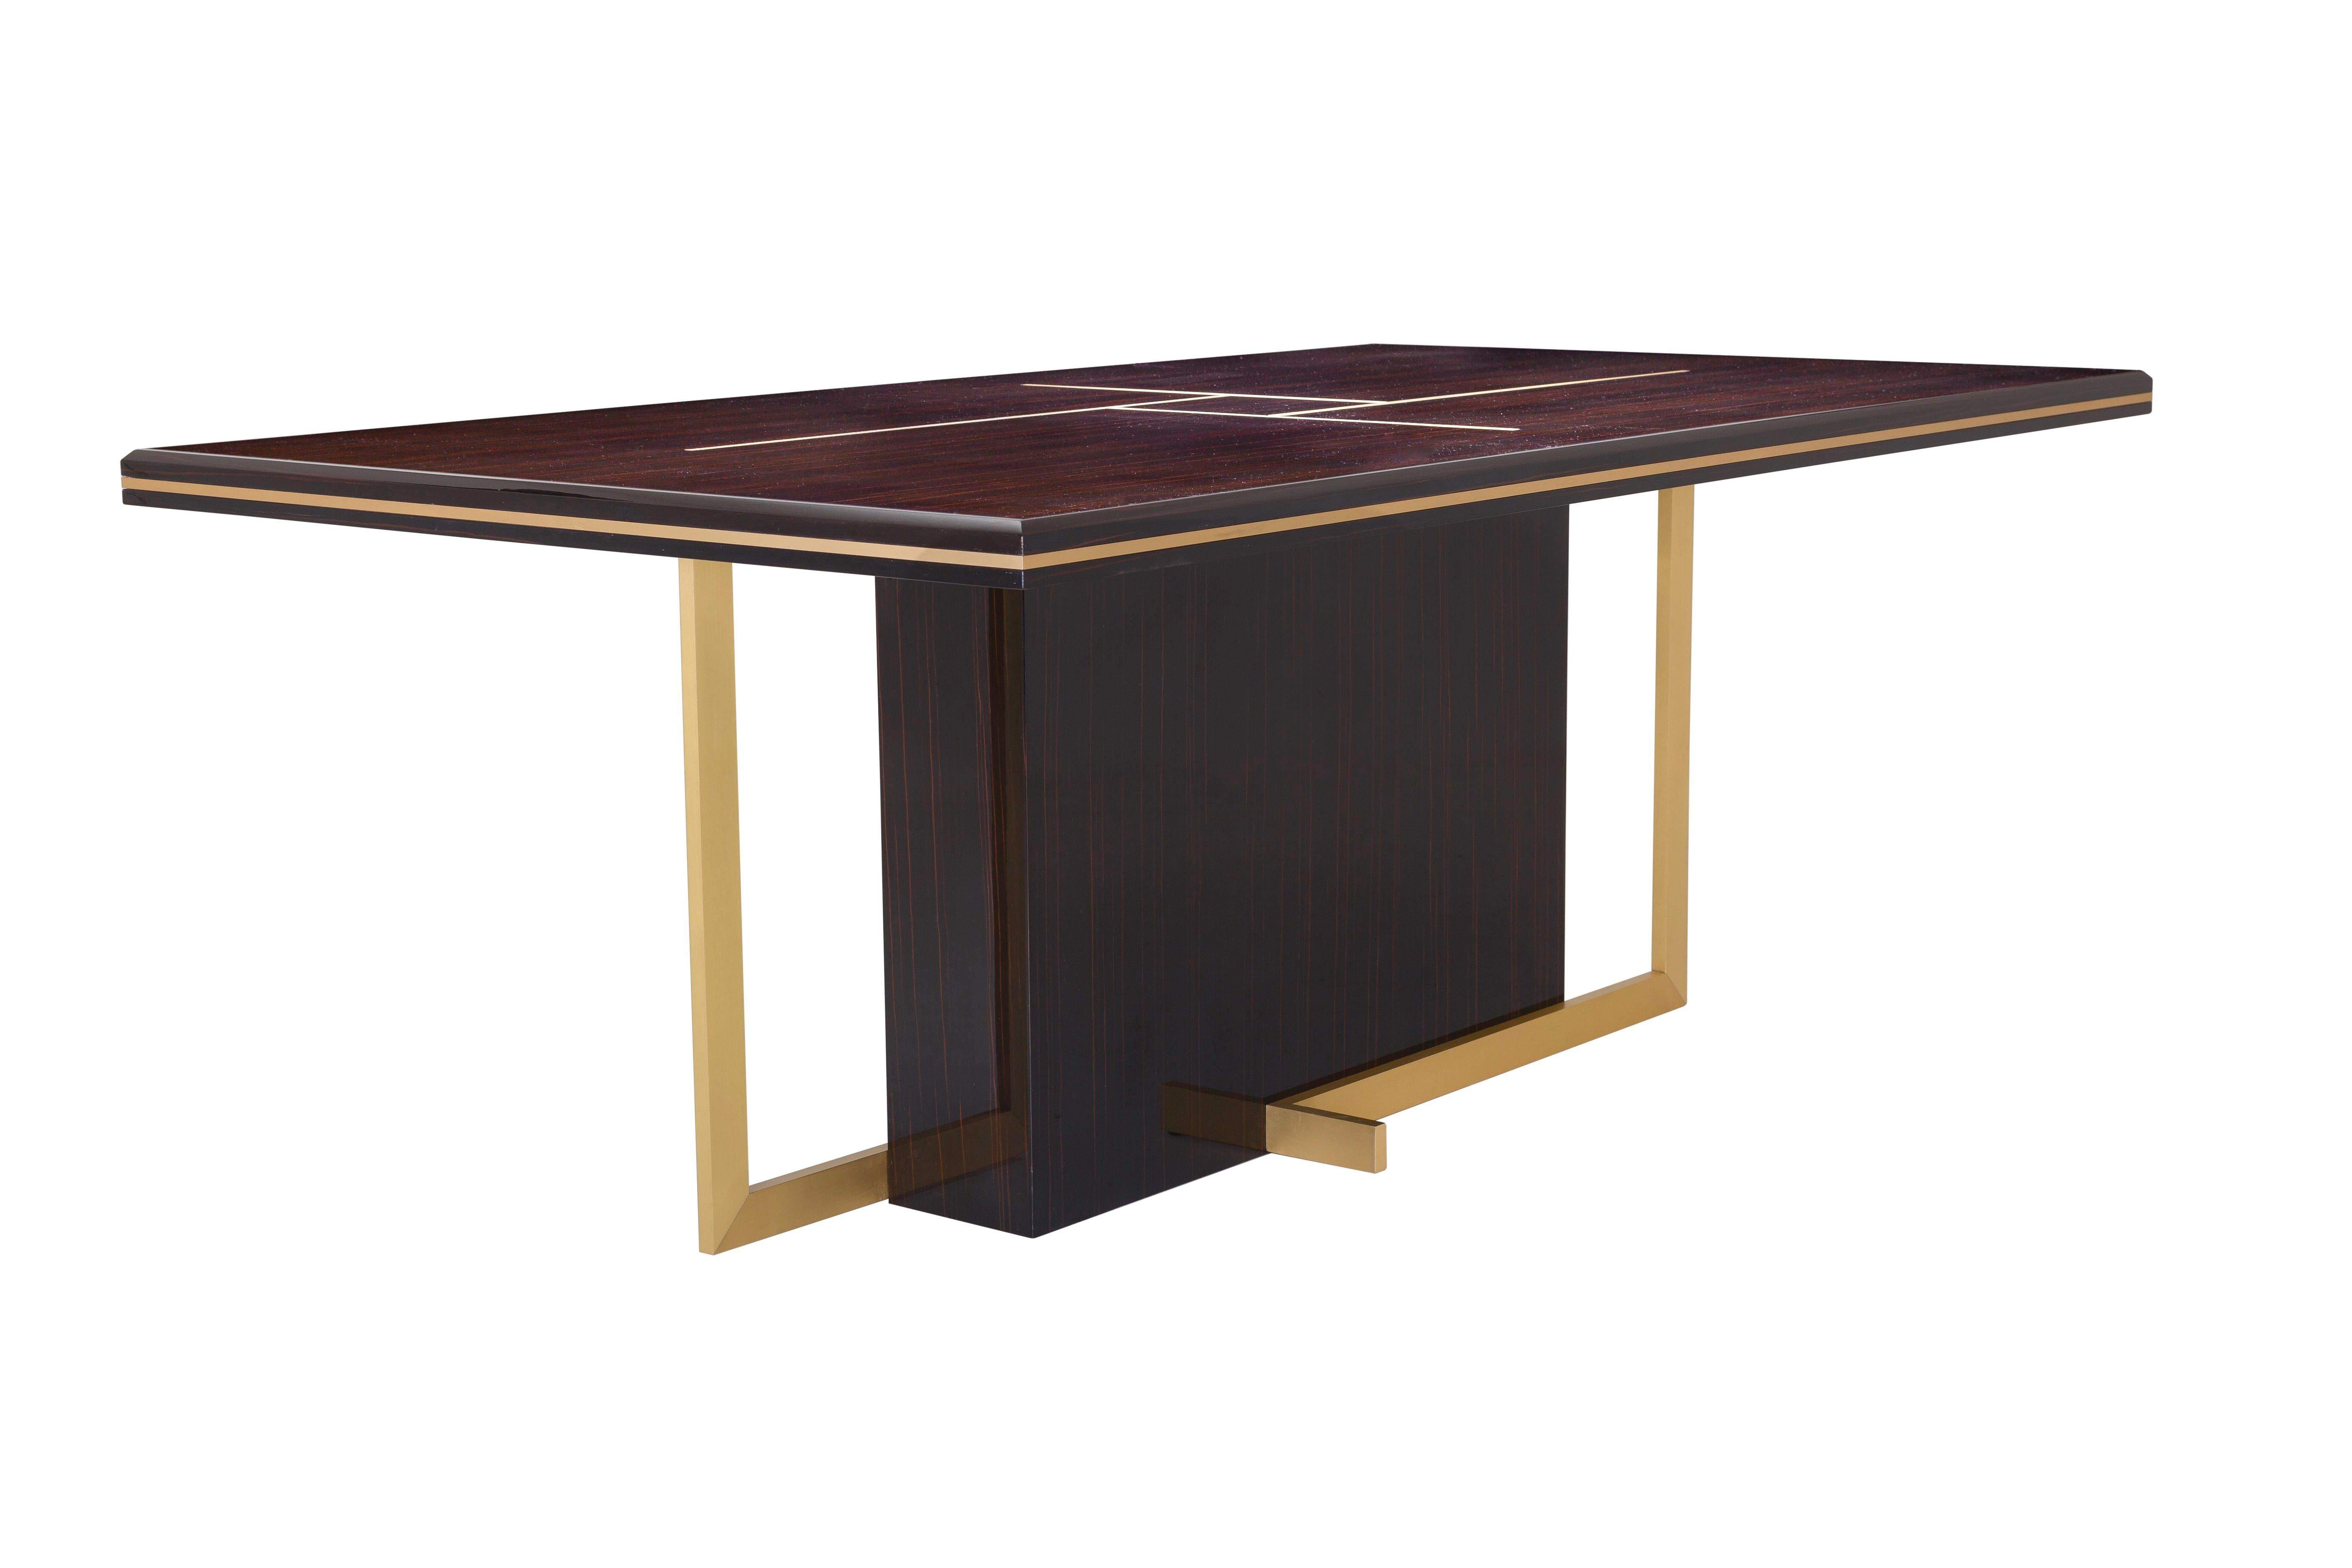 Eclectic and very elegant, this dining table embraces sensuality in decoration, combining wood and metal textures and keeping the balanced design.

Glossy Ebony Makassar veneer top and brushed Brass base and trimmings.
   